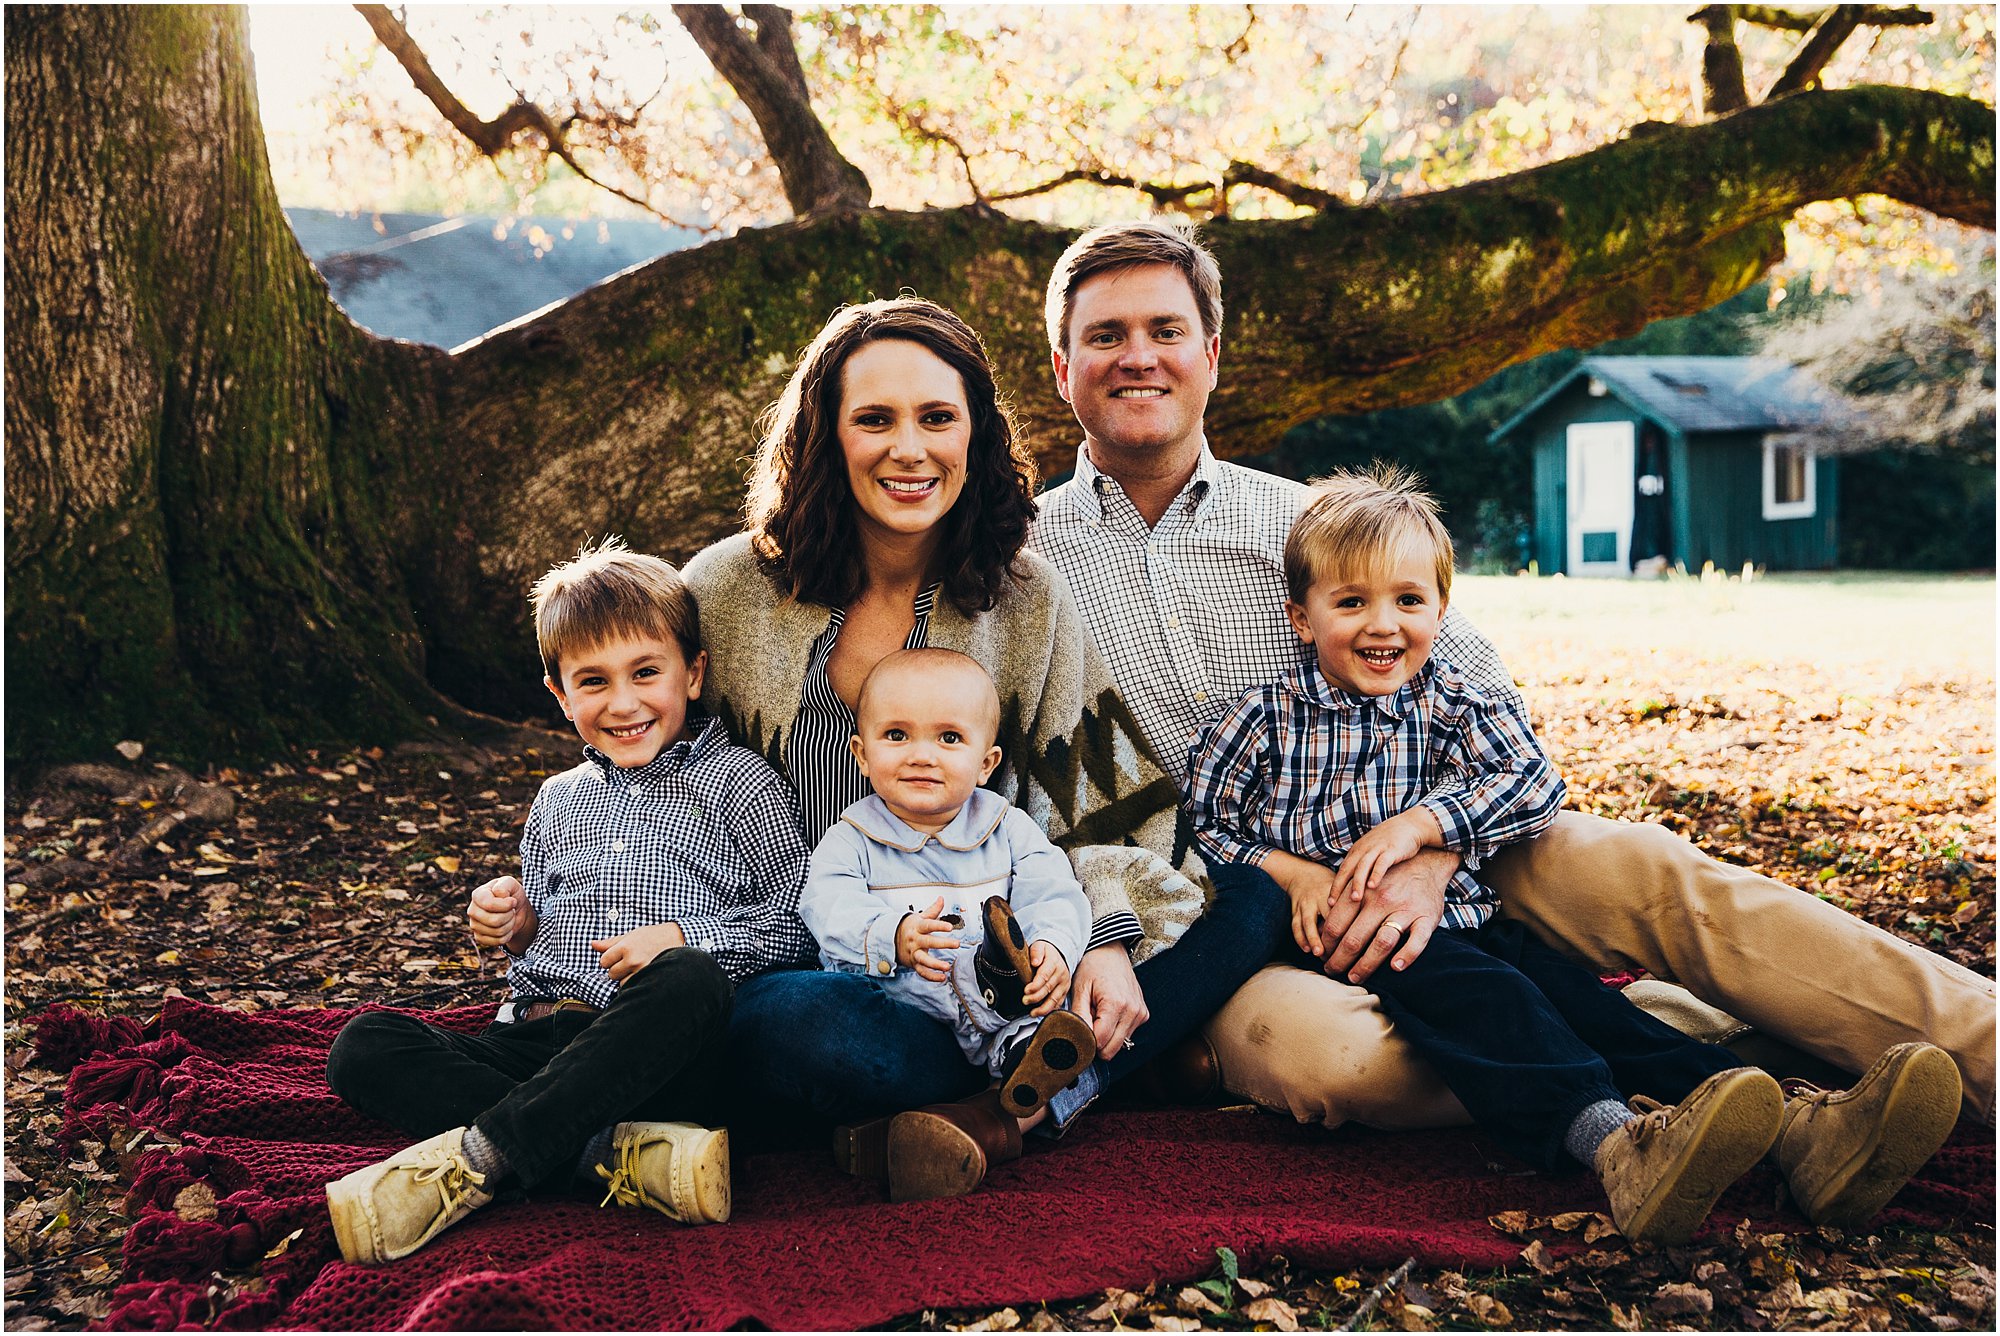 Family snuggled up smiling together on blanket under a large tree in Chattanooga, TN